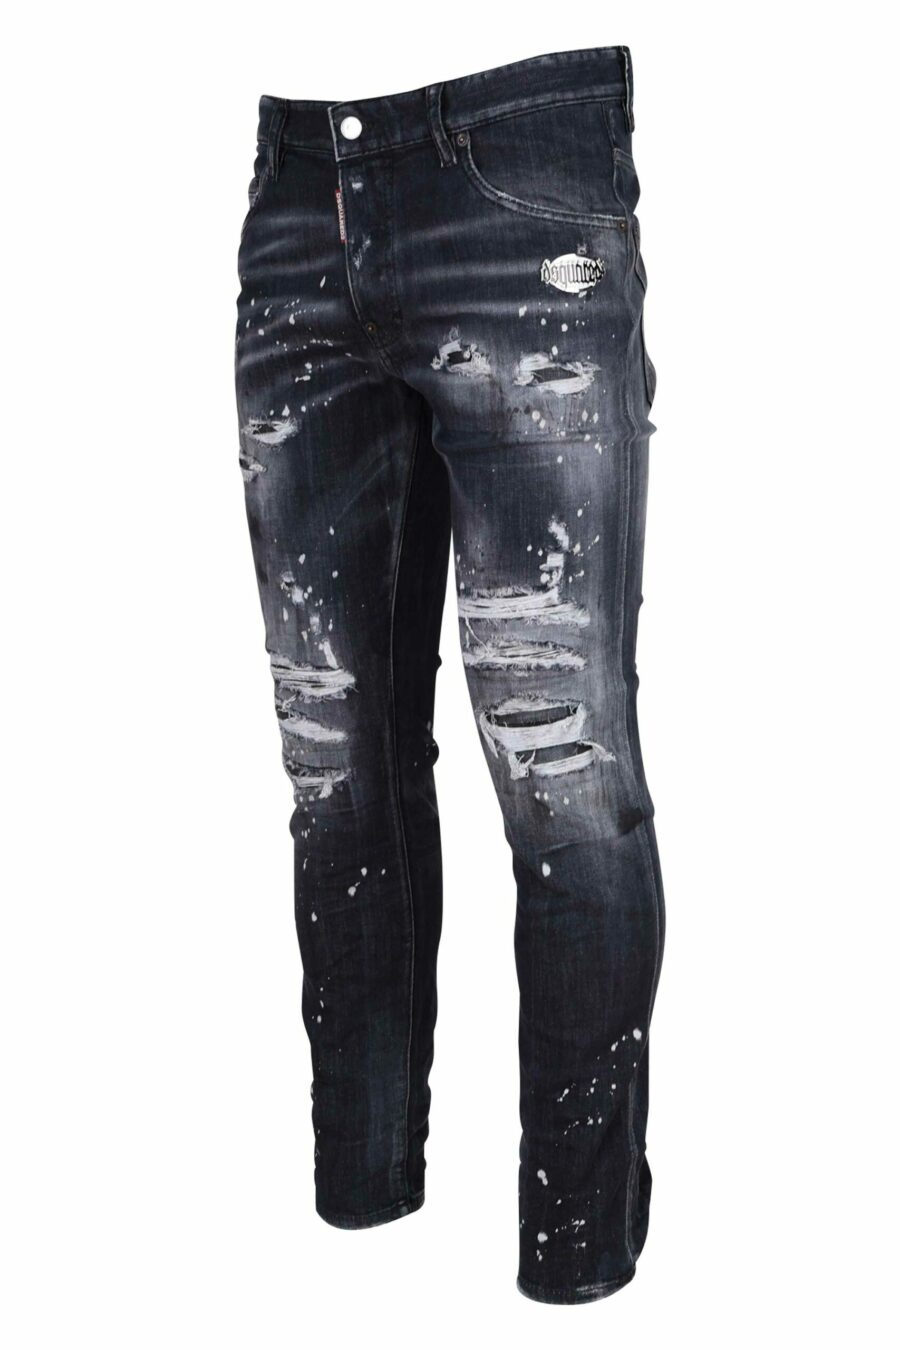 Black "skater jean" jeans with rips - 8054148284084 1 scaled